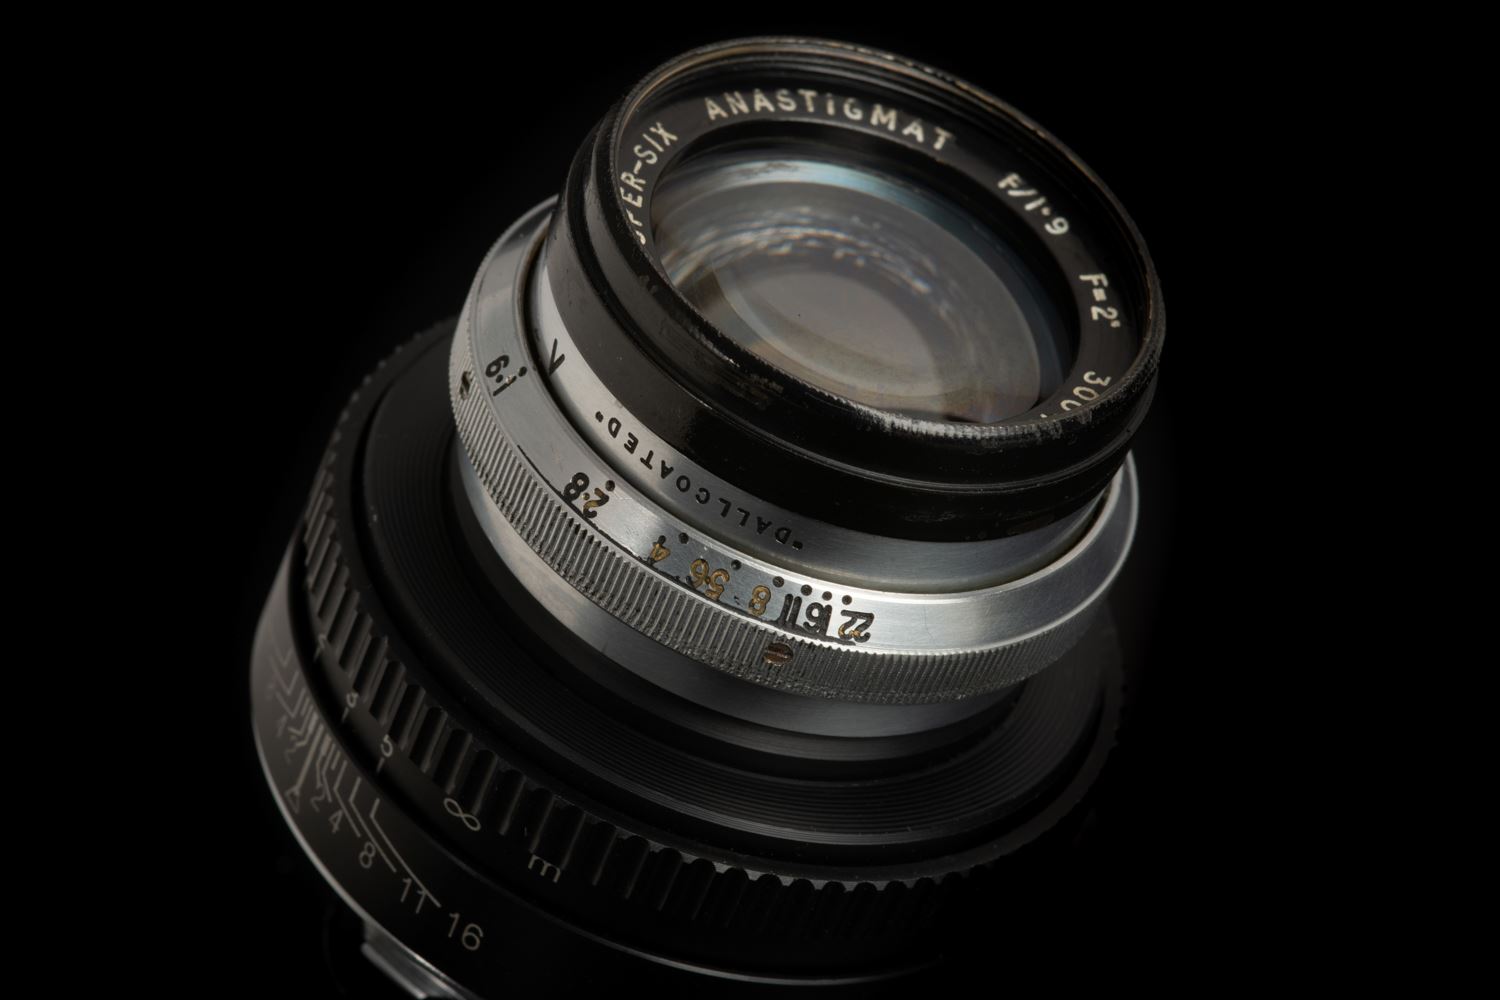 Picture of Dallmeyer Super-Six Anastigmat 2inch f/1.9 Modified to Leica M